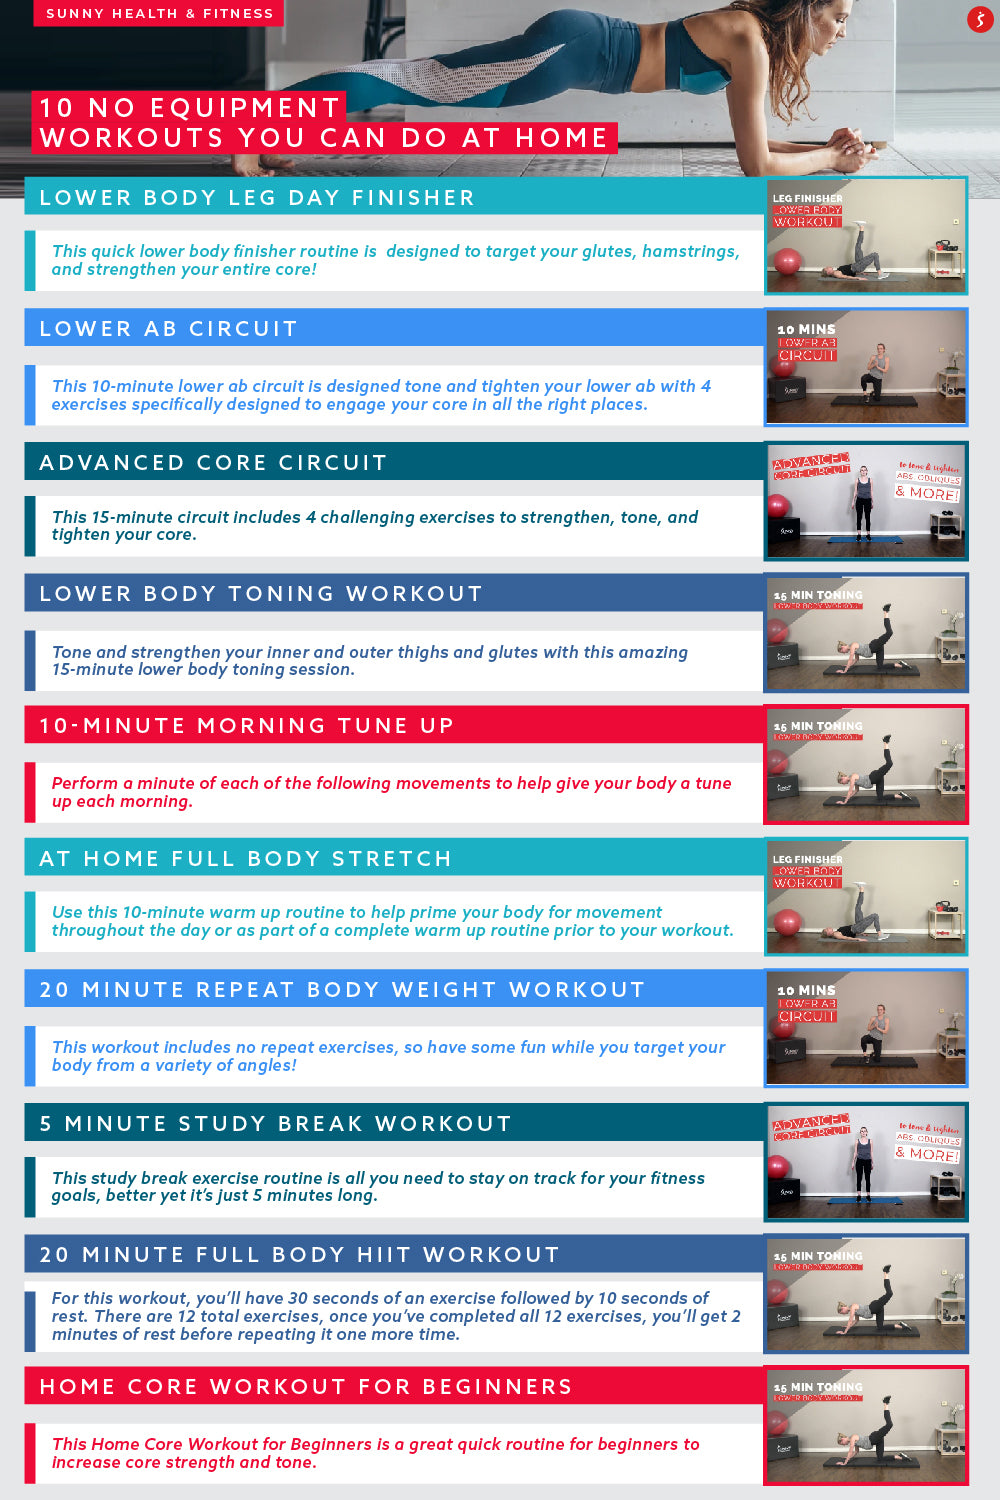 20 Minute Full Body Yoga Workout [Guide], Daily Infographic